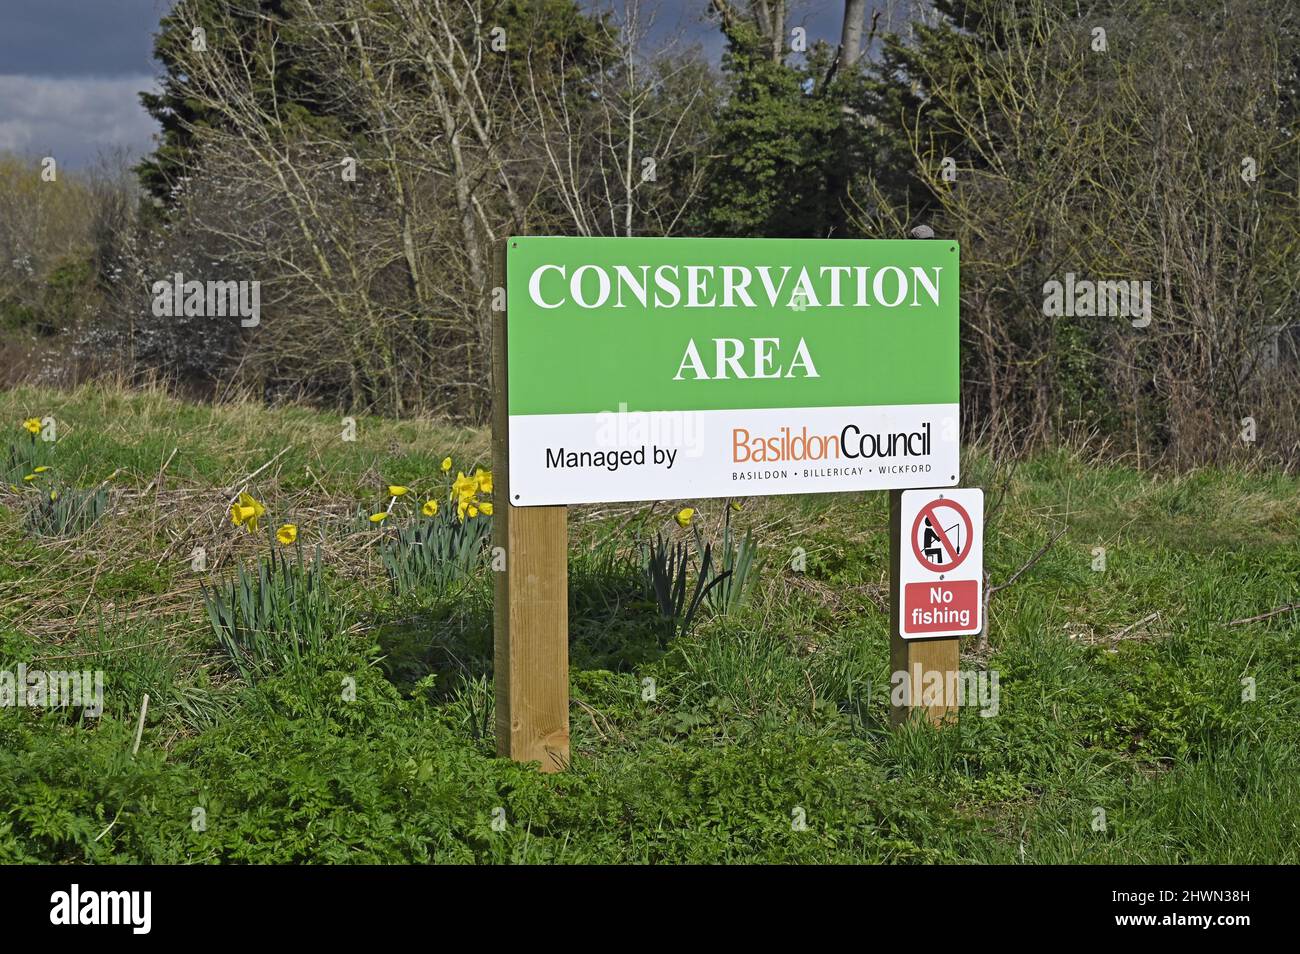 New Conservation Area sign erected near London Road in Wickford Essex UK. Anglers have fished here for several years. New sign shows 'No Fishing'. Stock Photo